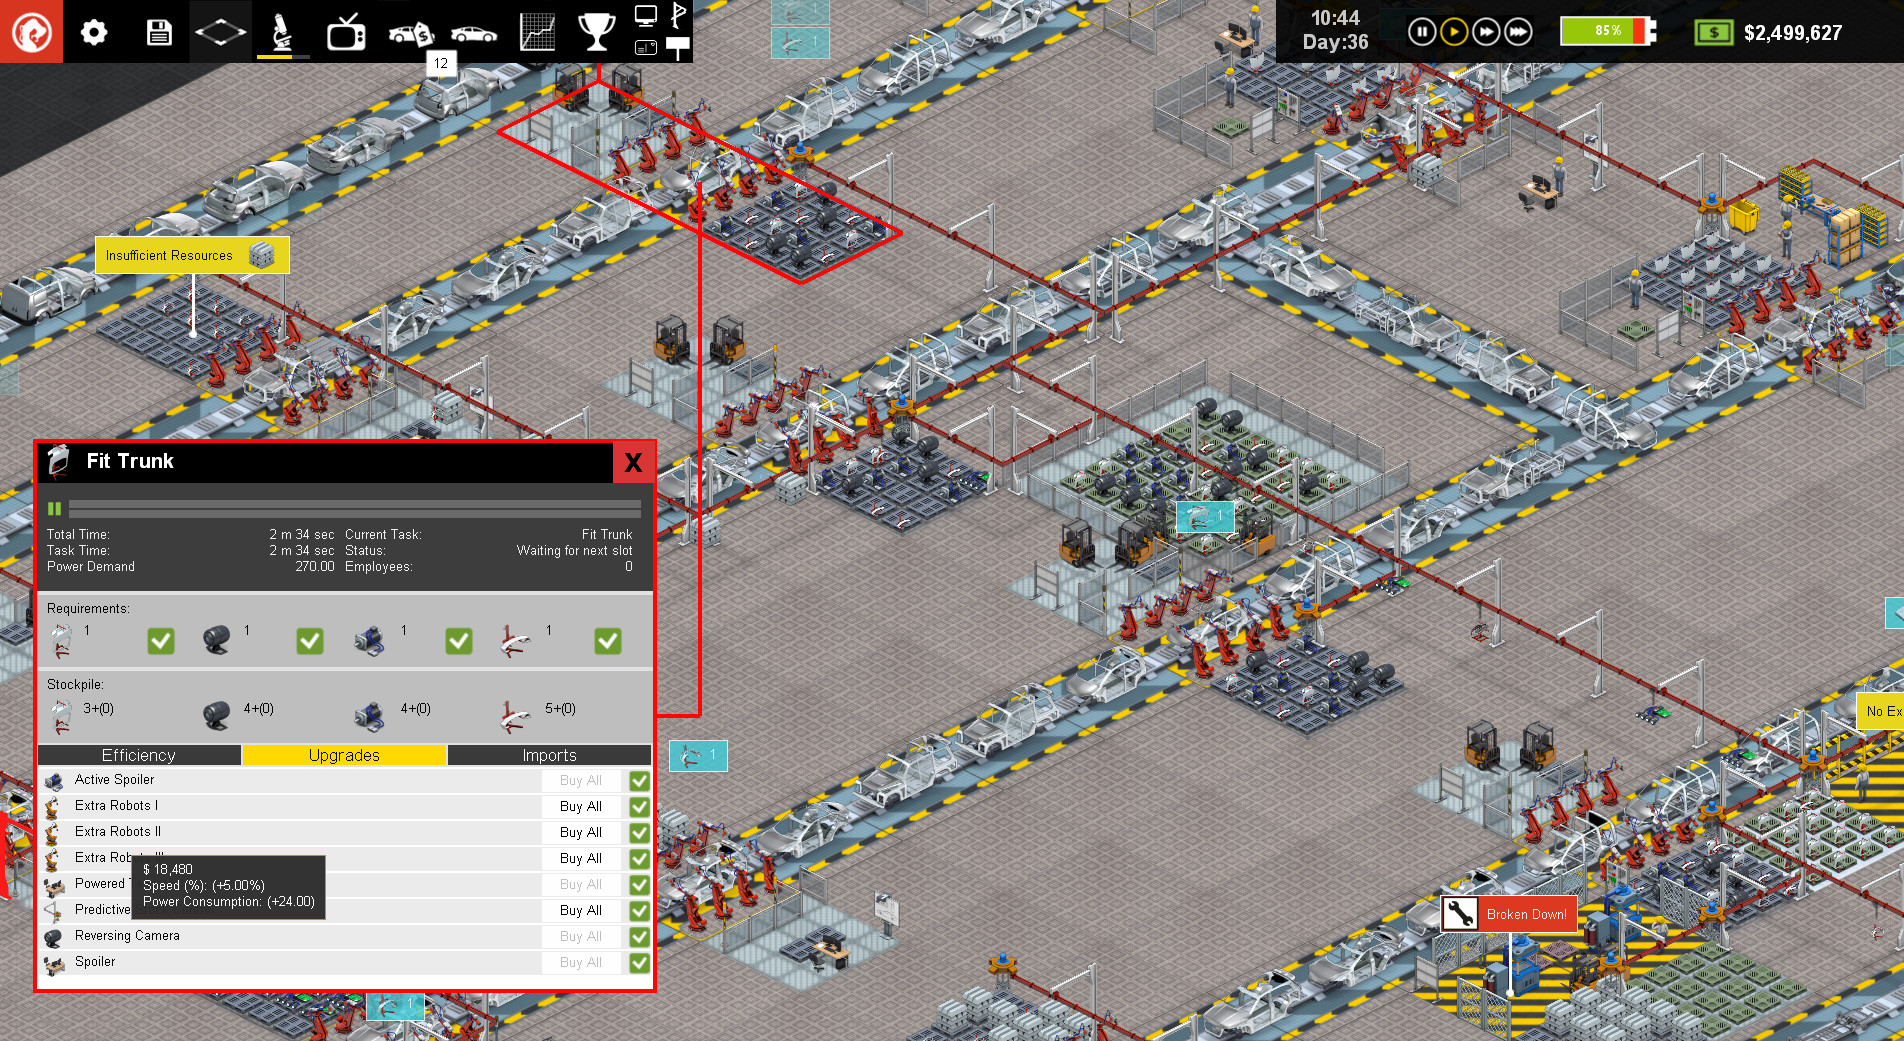 Production Line : Car factory simulation Free Download